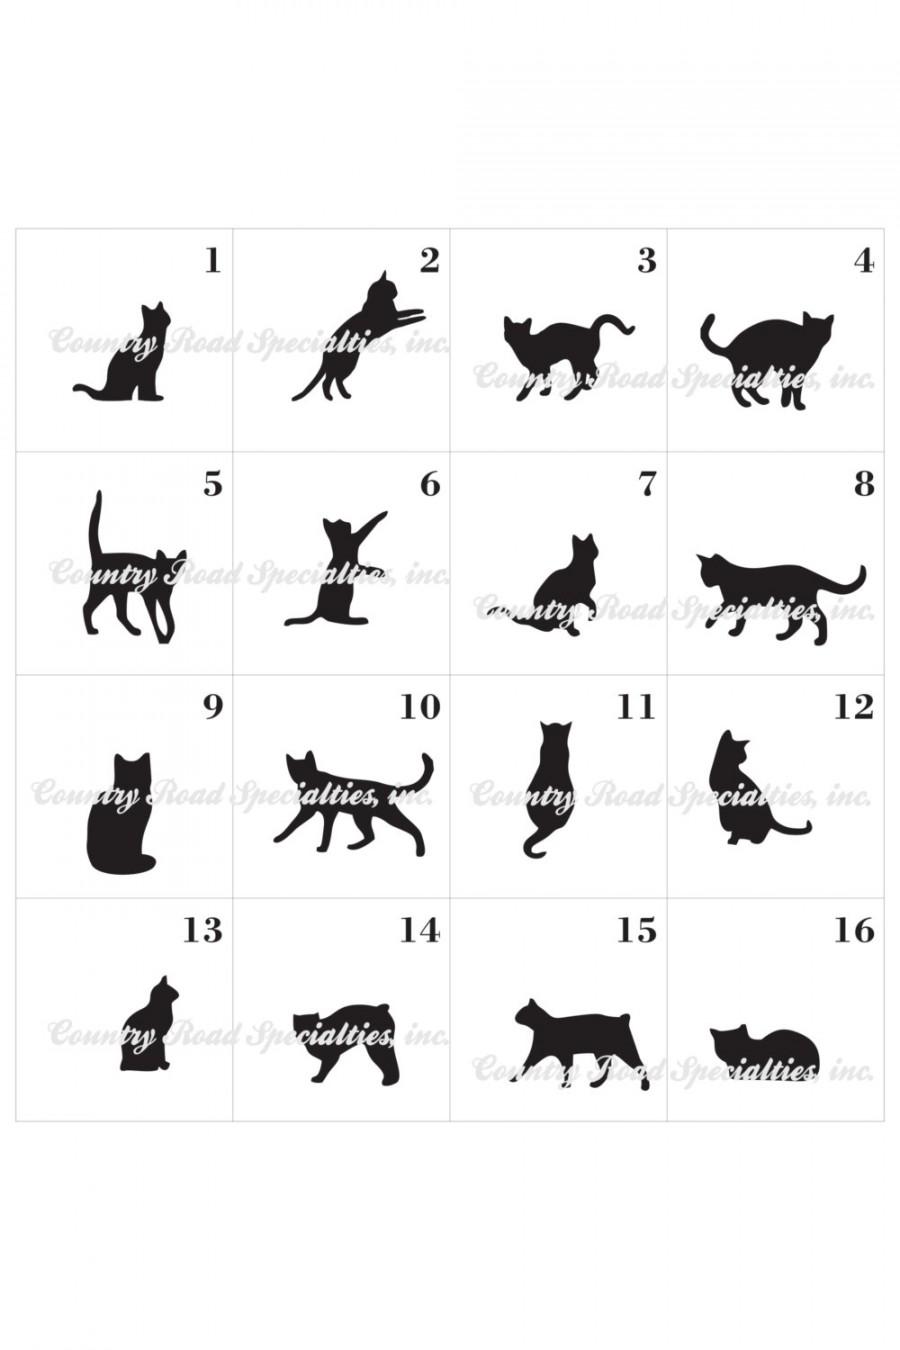 Wedding - Cat Pet Silhouette Cats cake topper add on MADE In USA...Ships From USA